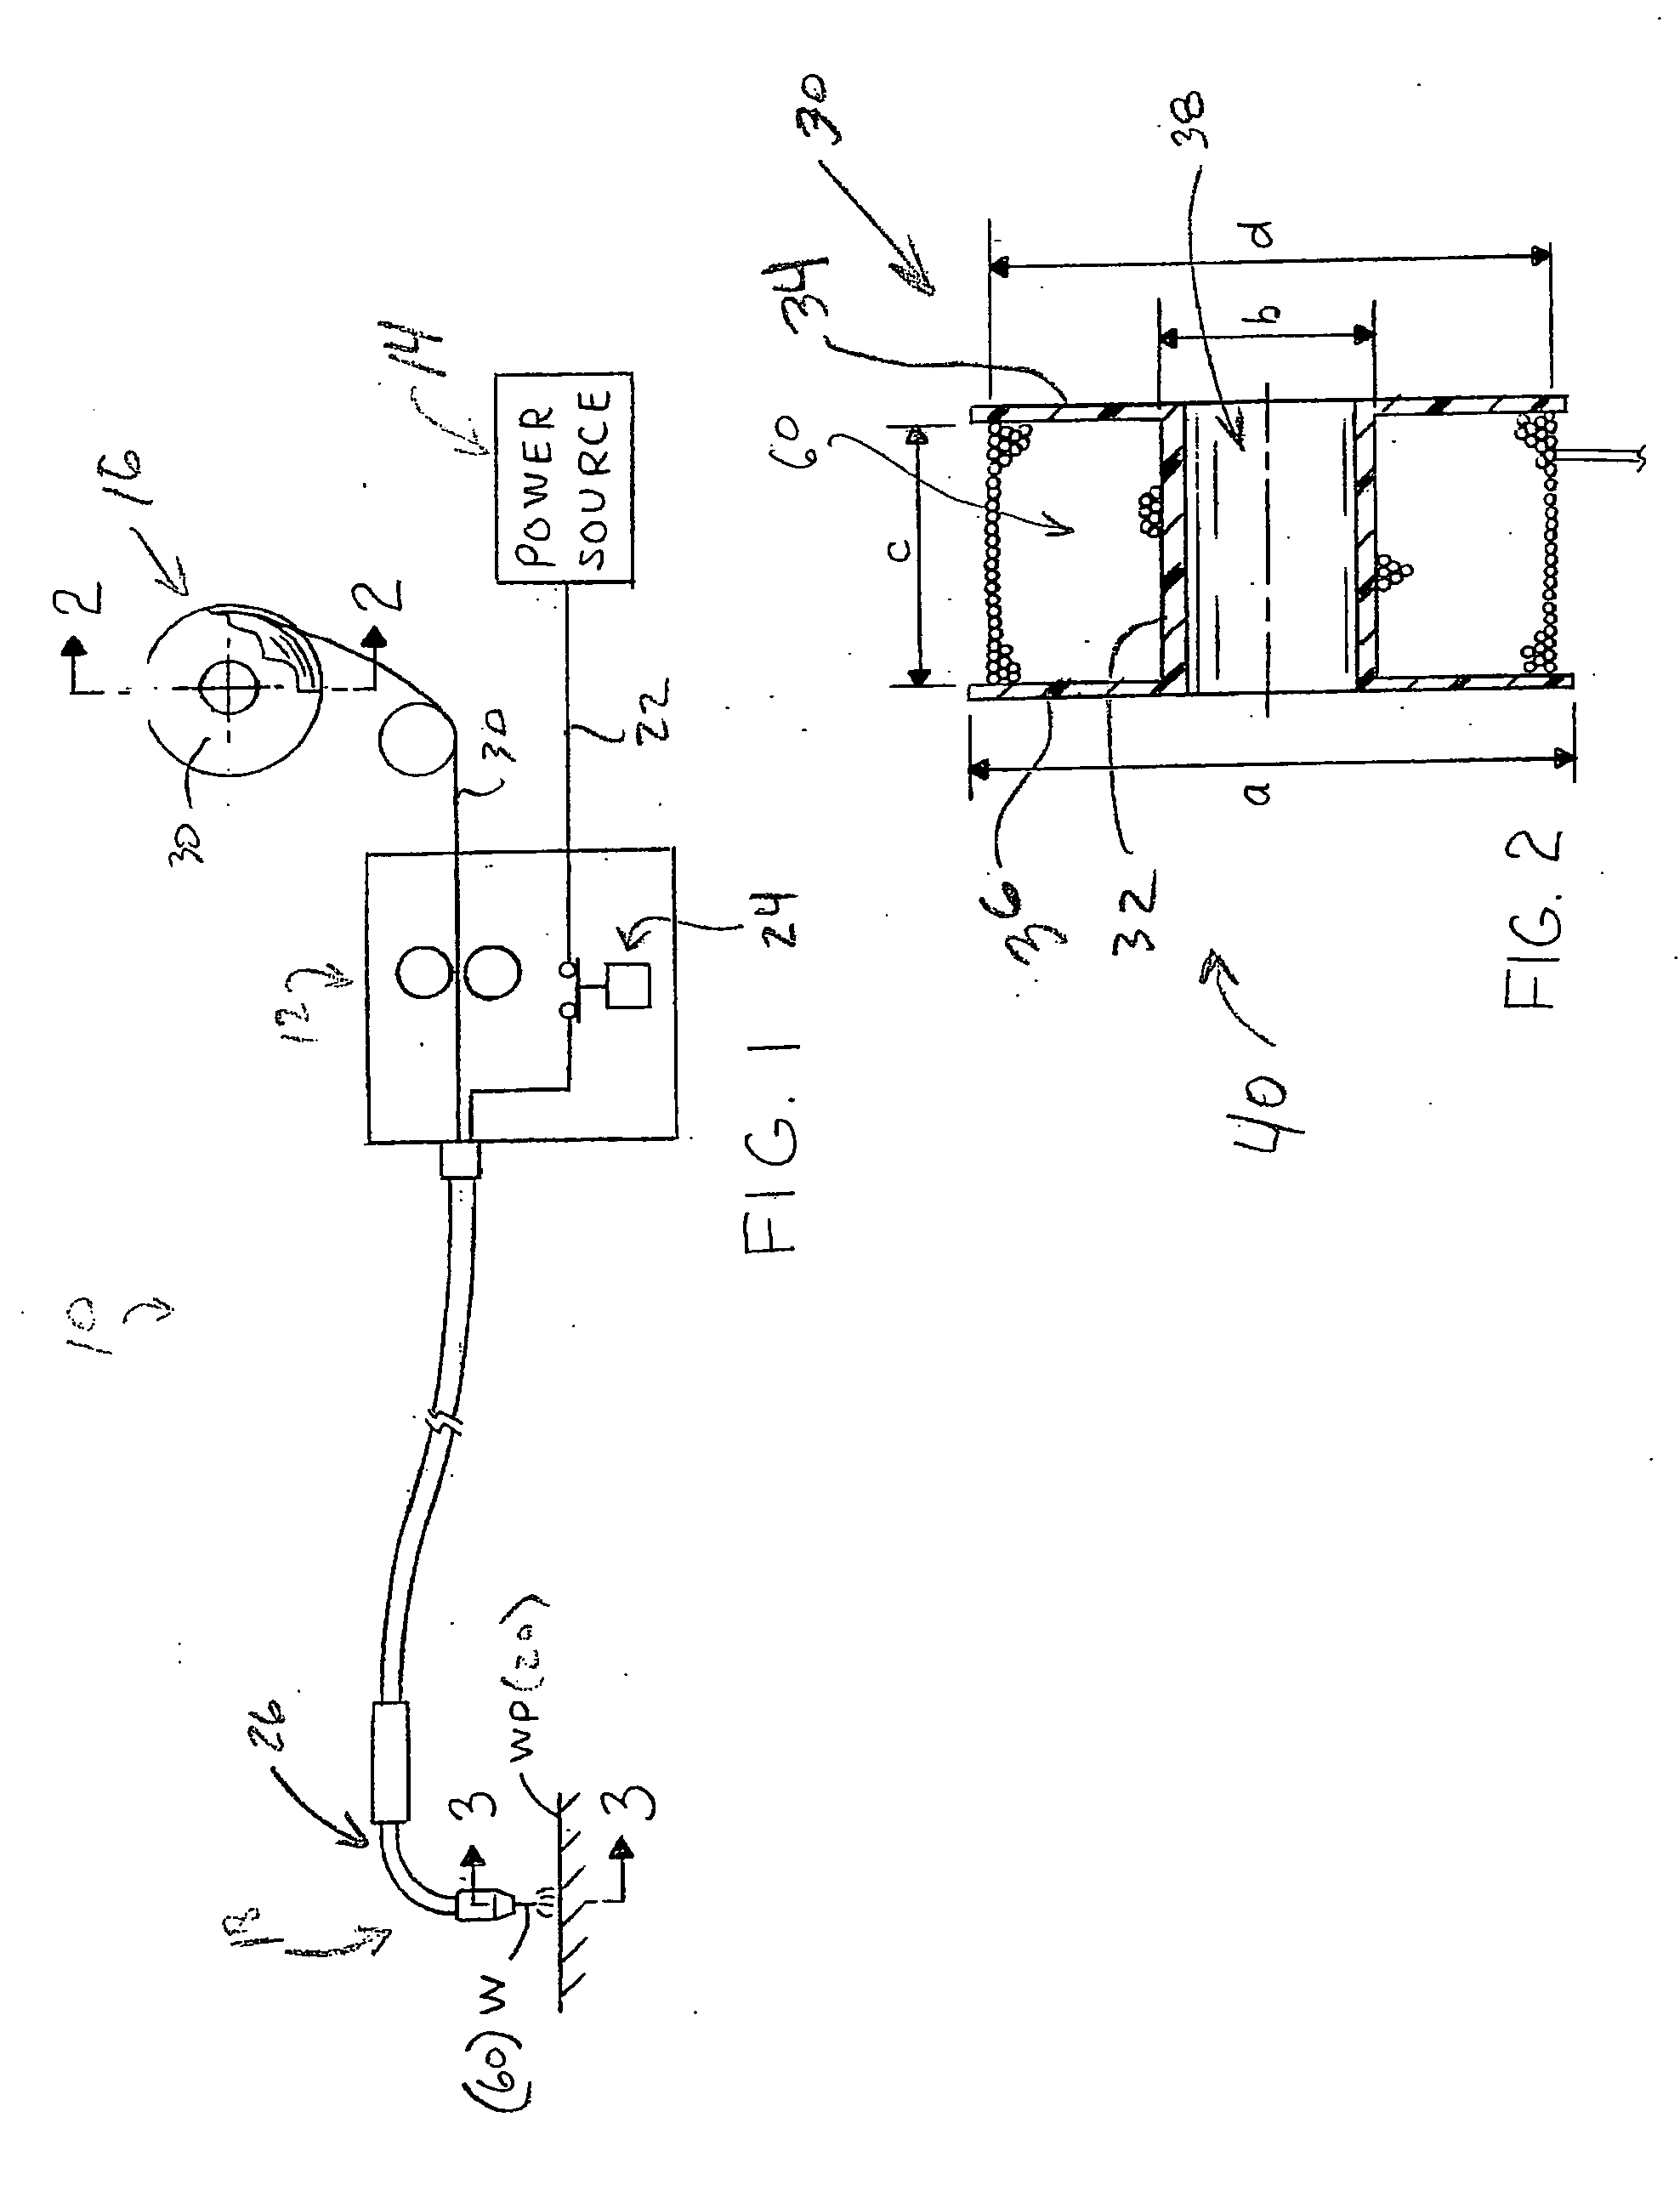 Weld wire with large cast, method of making same, and loaded spool article of manufacture